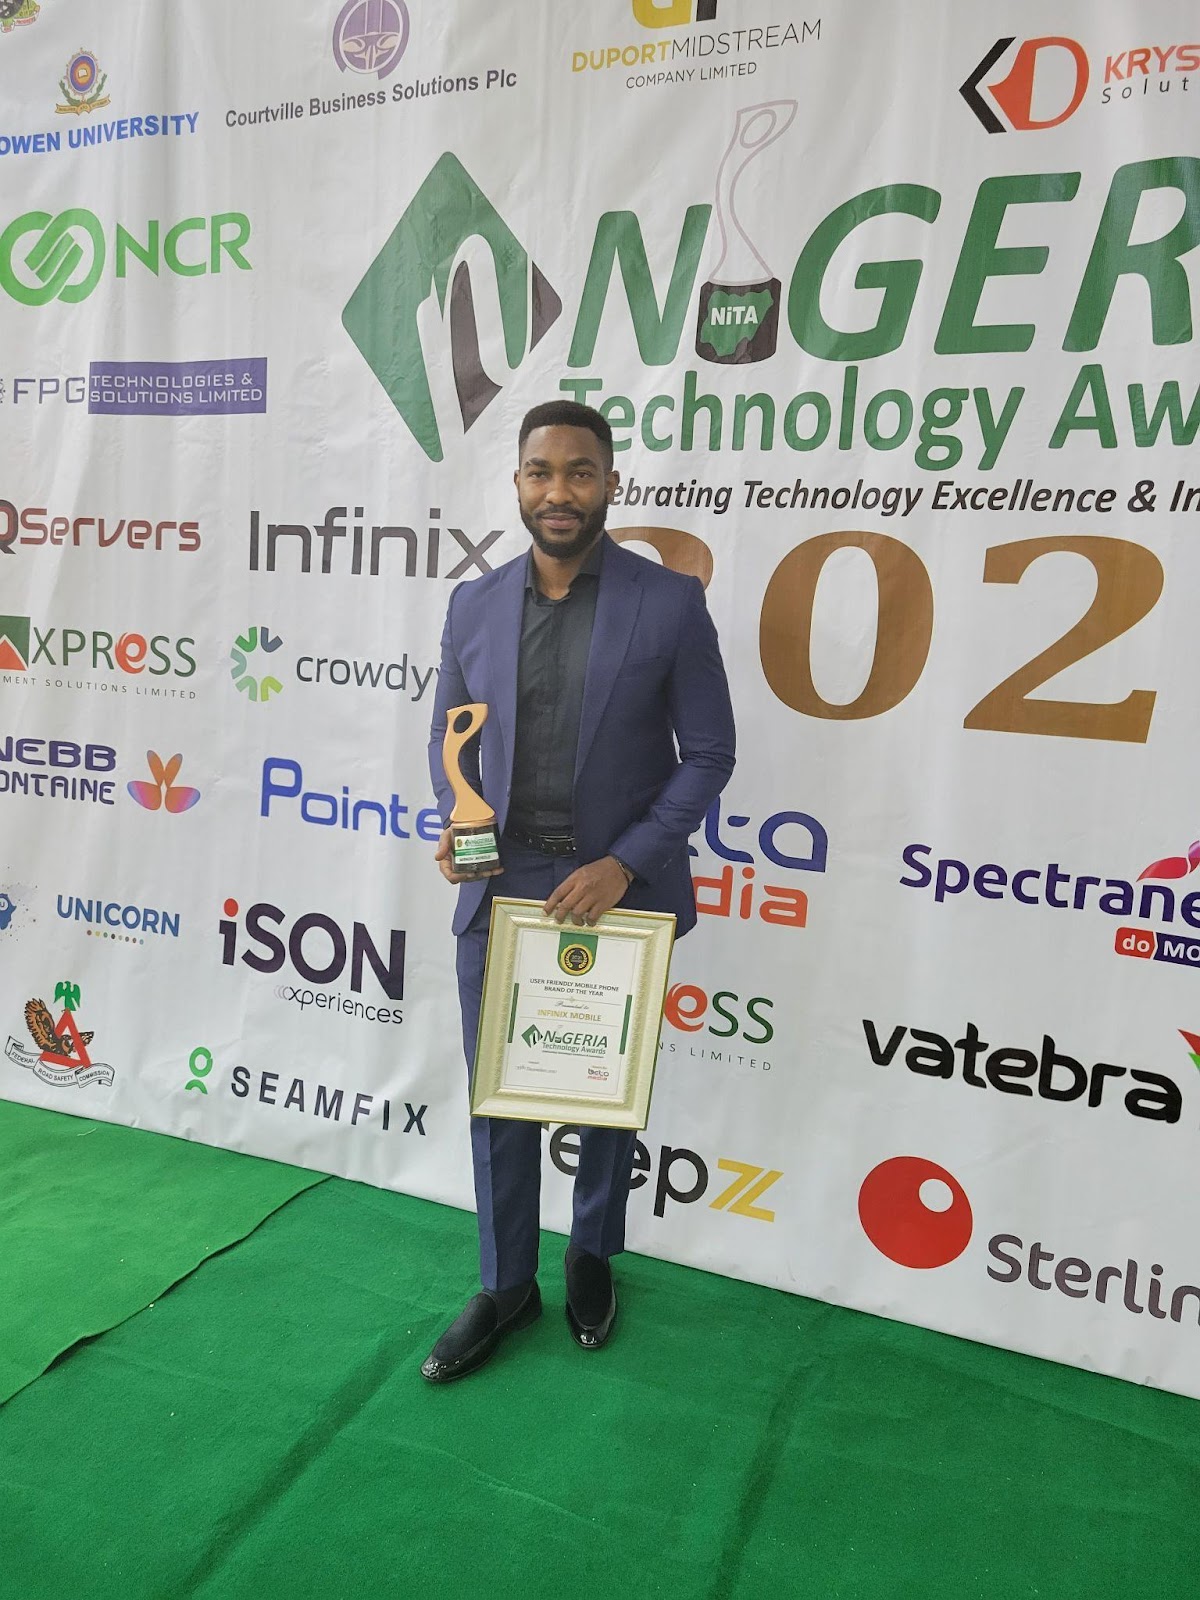 Infinix wins Most User-Friendly Mobile Phone Brand of the Year from NiTA